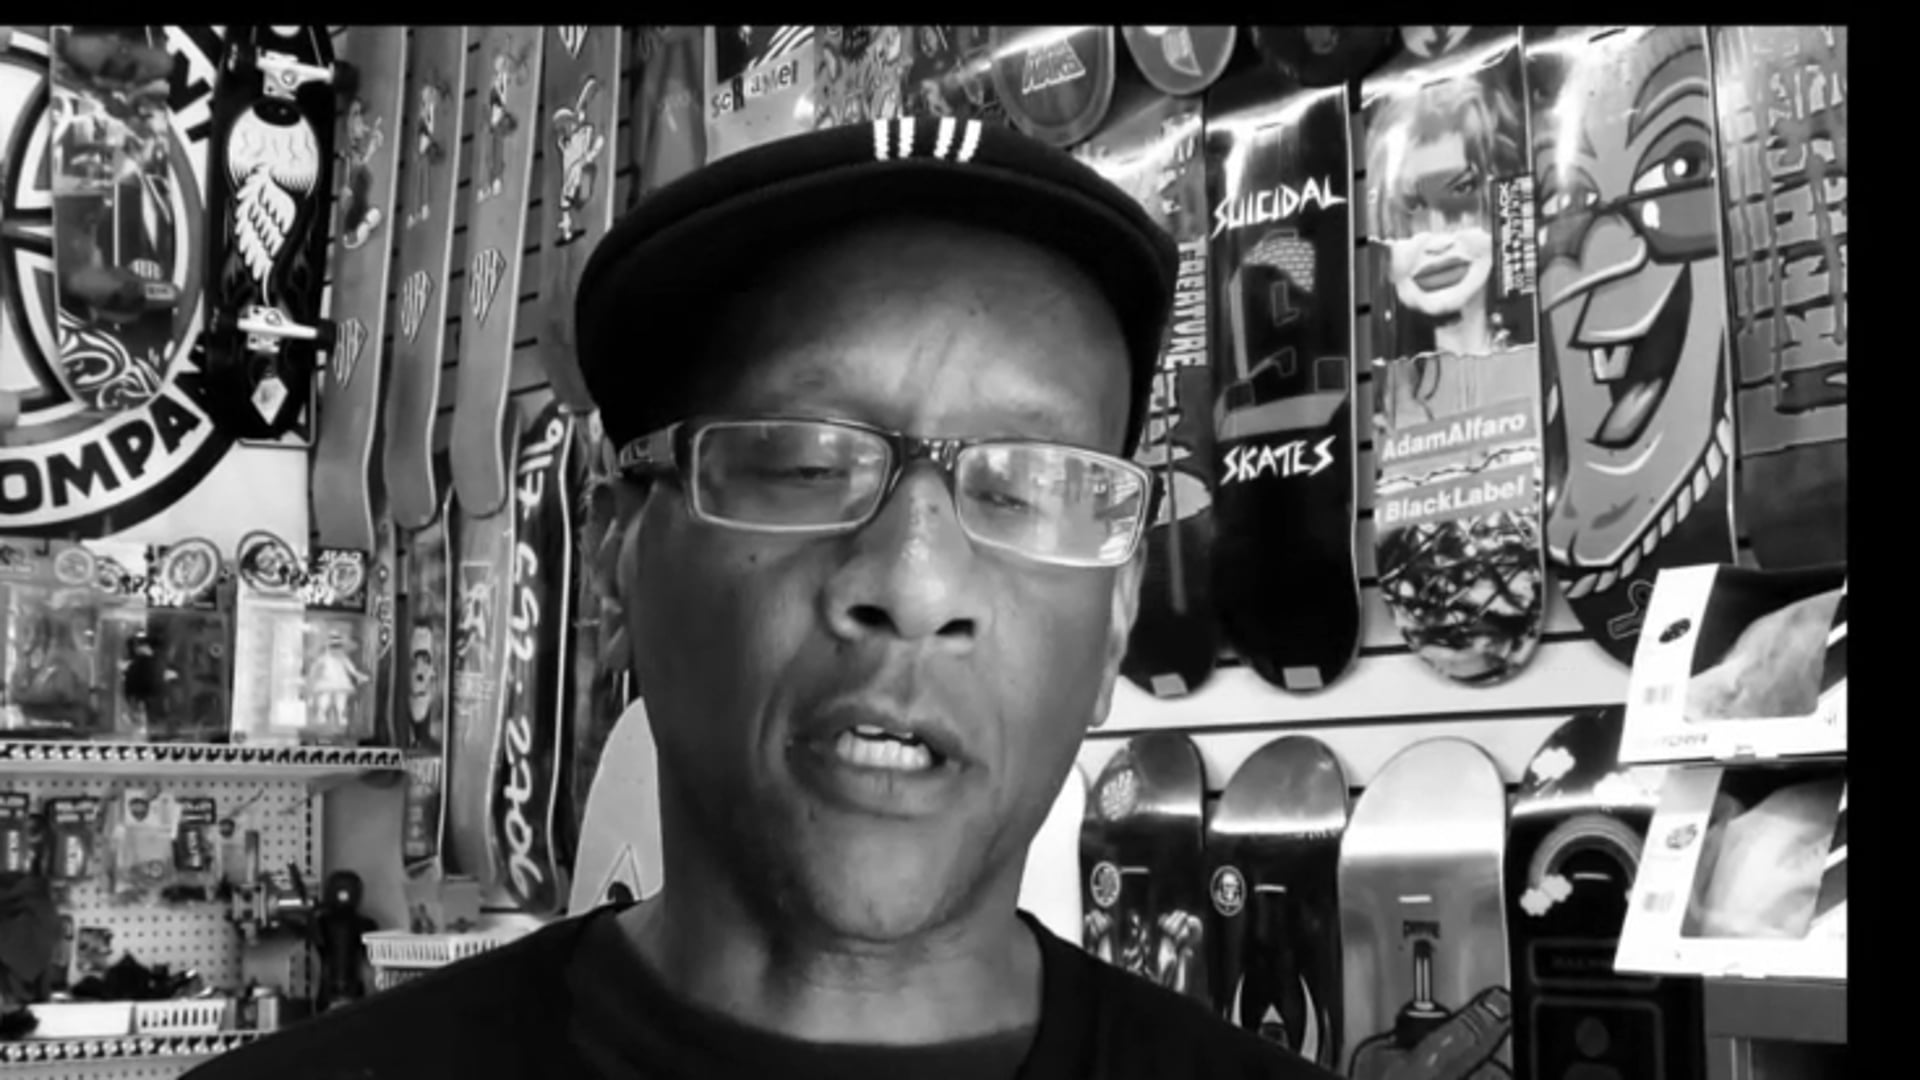 The Spades - History of African-Americans in skateboarding